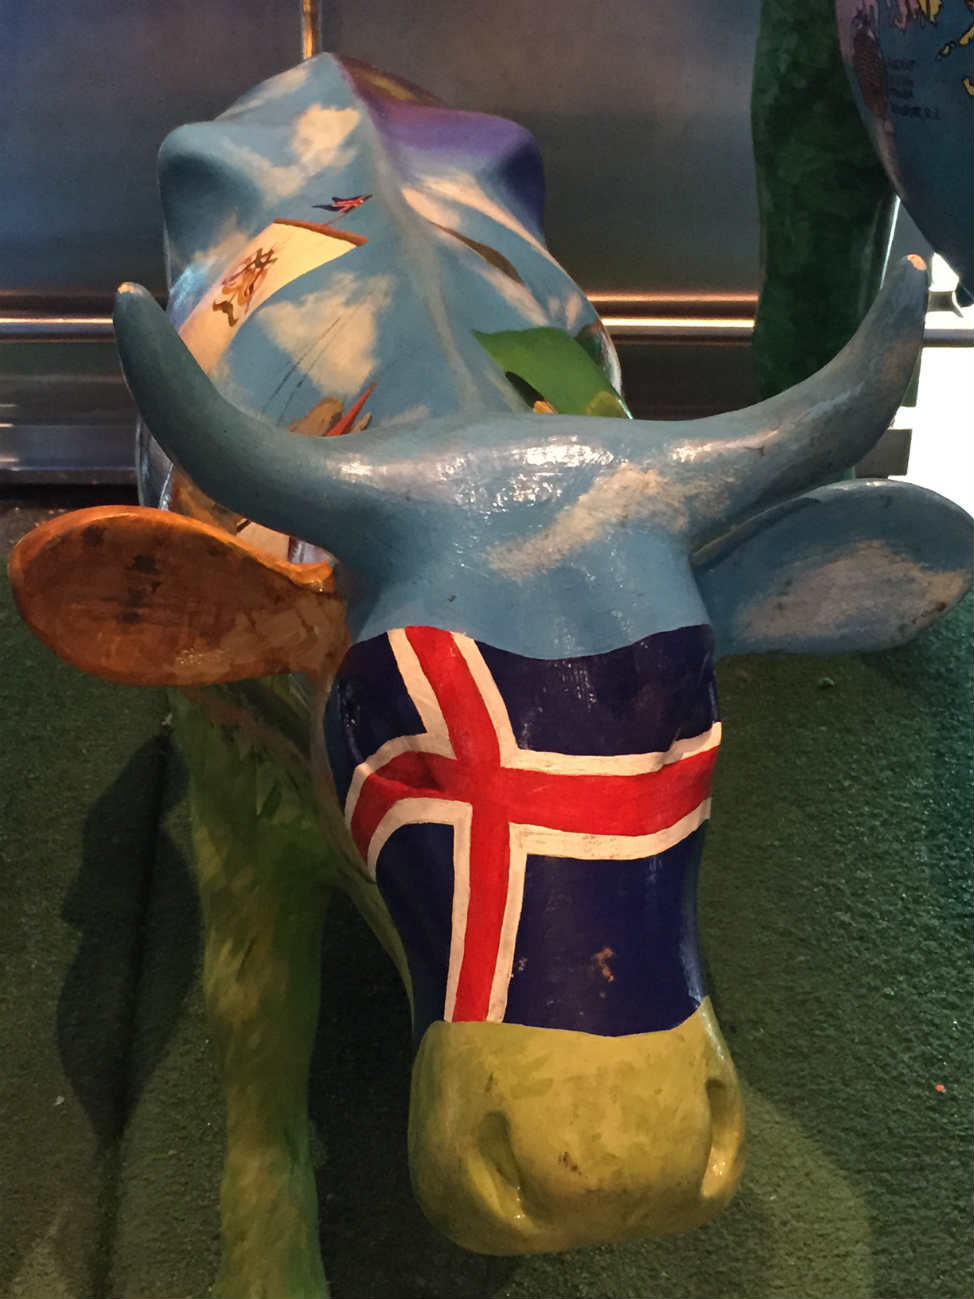 Iceland road trip - Iceland's Mascot?